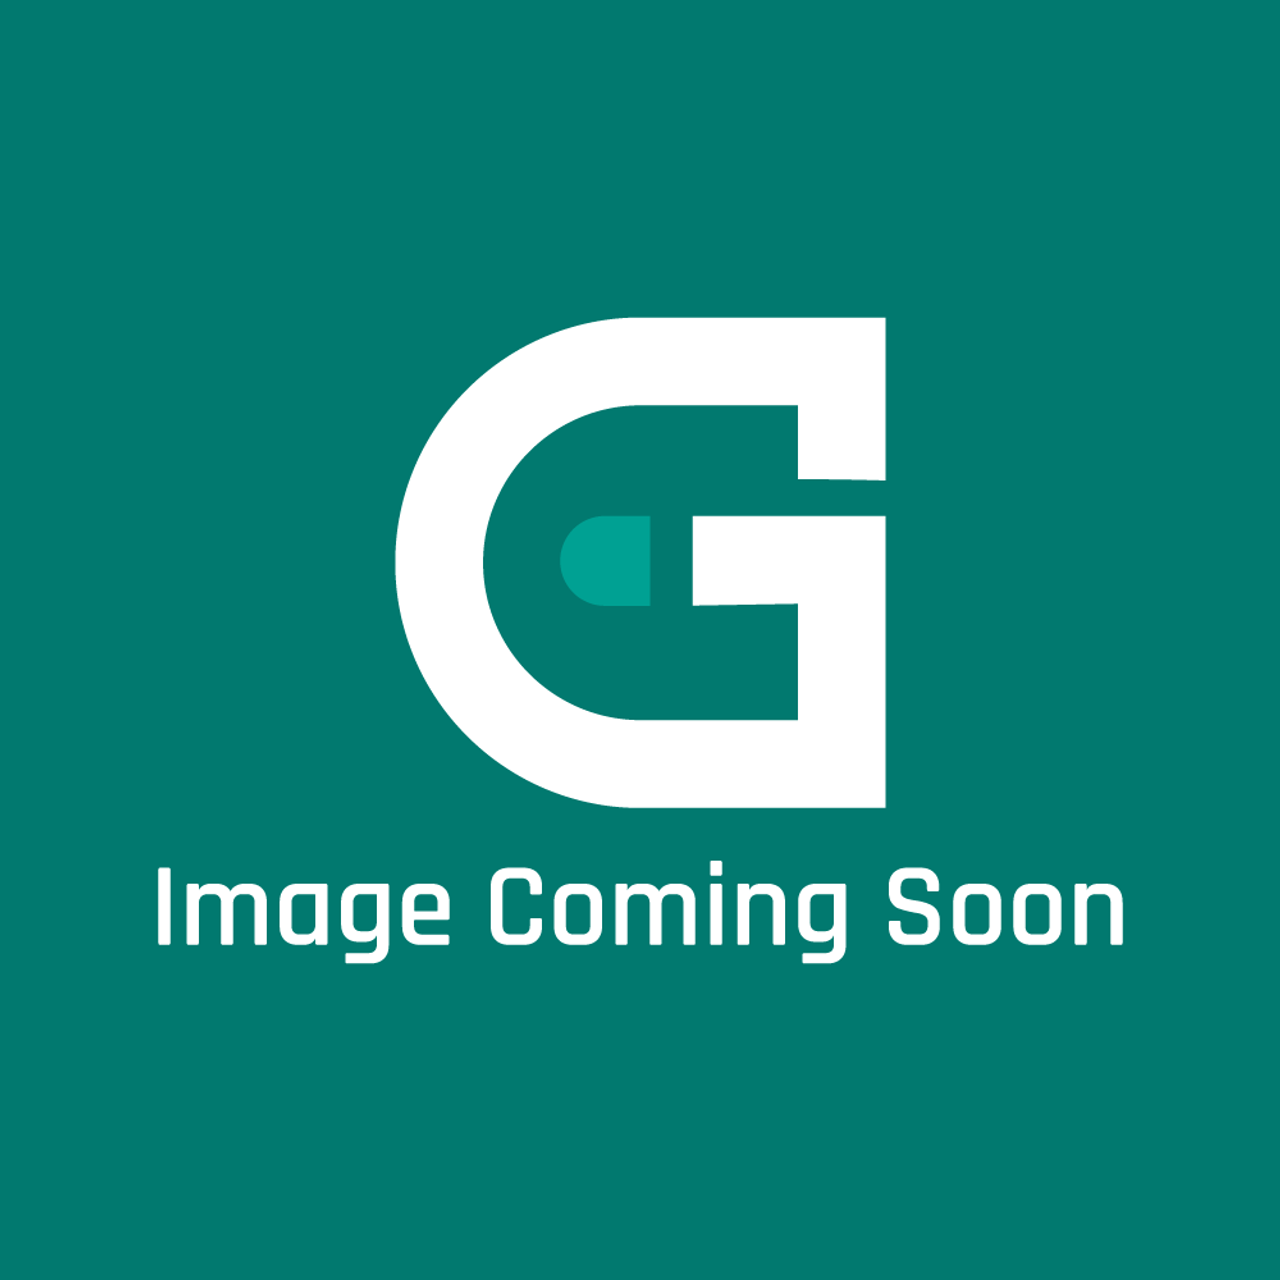 Frigidaire - Electrolux A316221701 8 Chrome Drip Pan - Image Coming Soon!